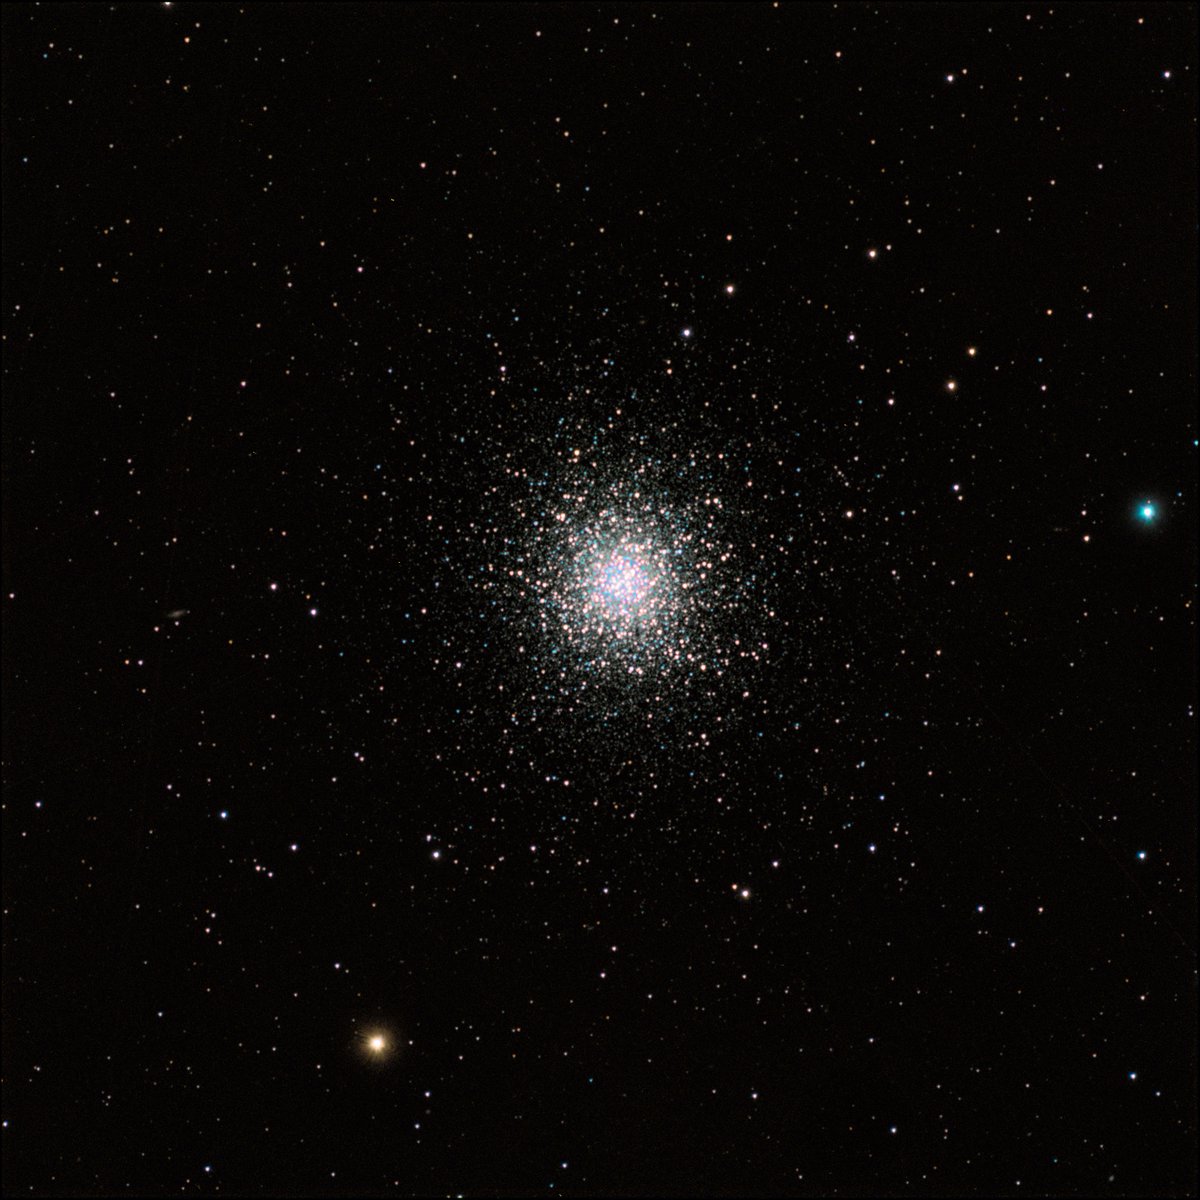 M13 made from 3x30 minute RGB images. Got a better colour doing it this way. @MoonHourSocial #Astrophotography #astronomy @ThePhotoHour